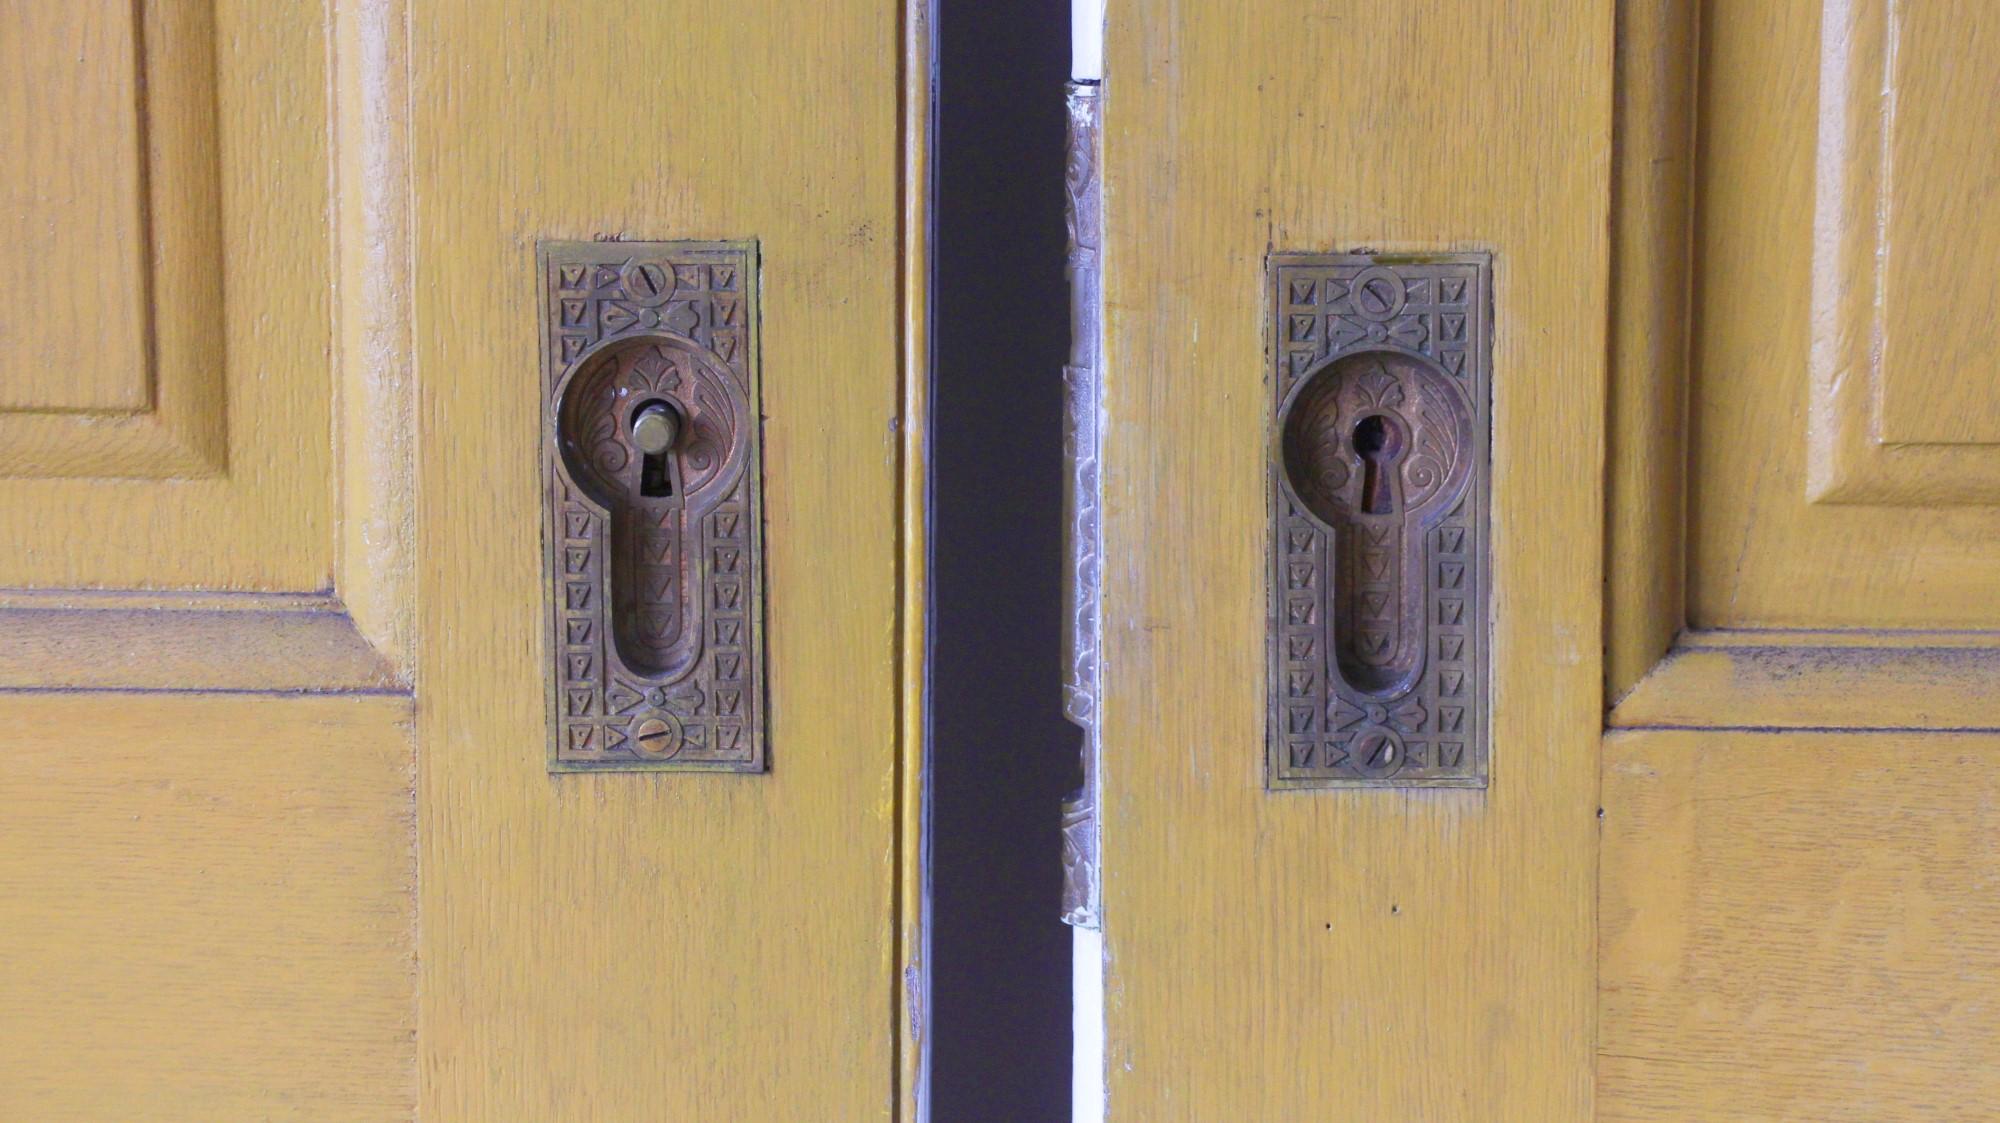 Late 19th Century 1890s Pair 4 Panel Wood Pocket Doors with Rollers Doors Alone Total